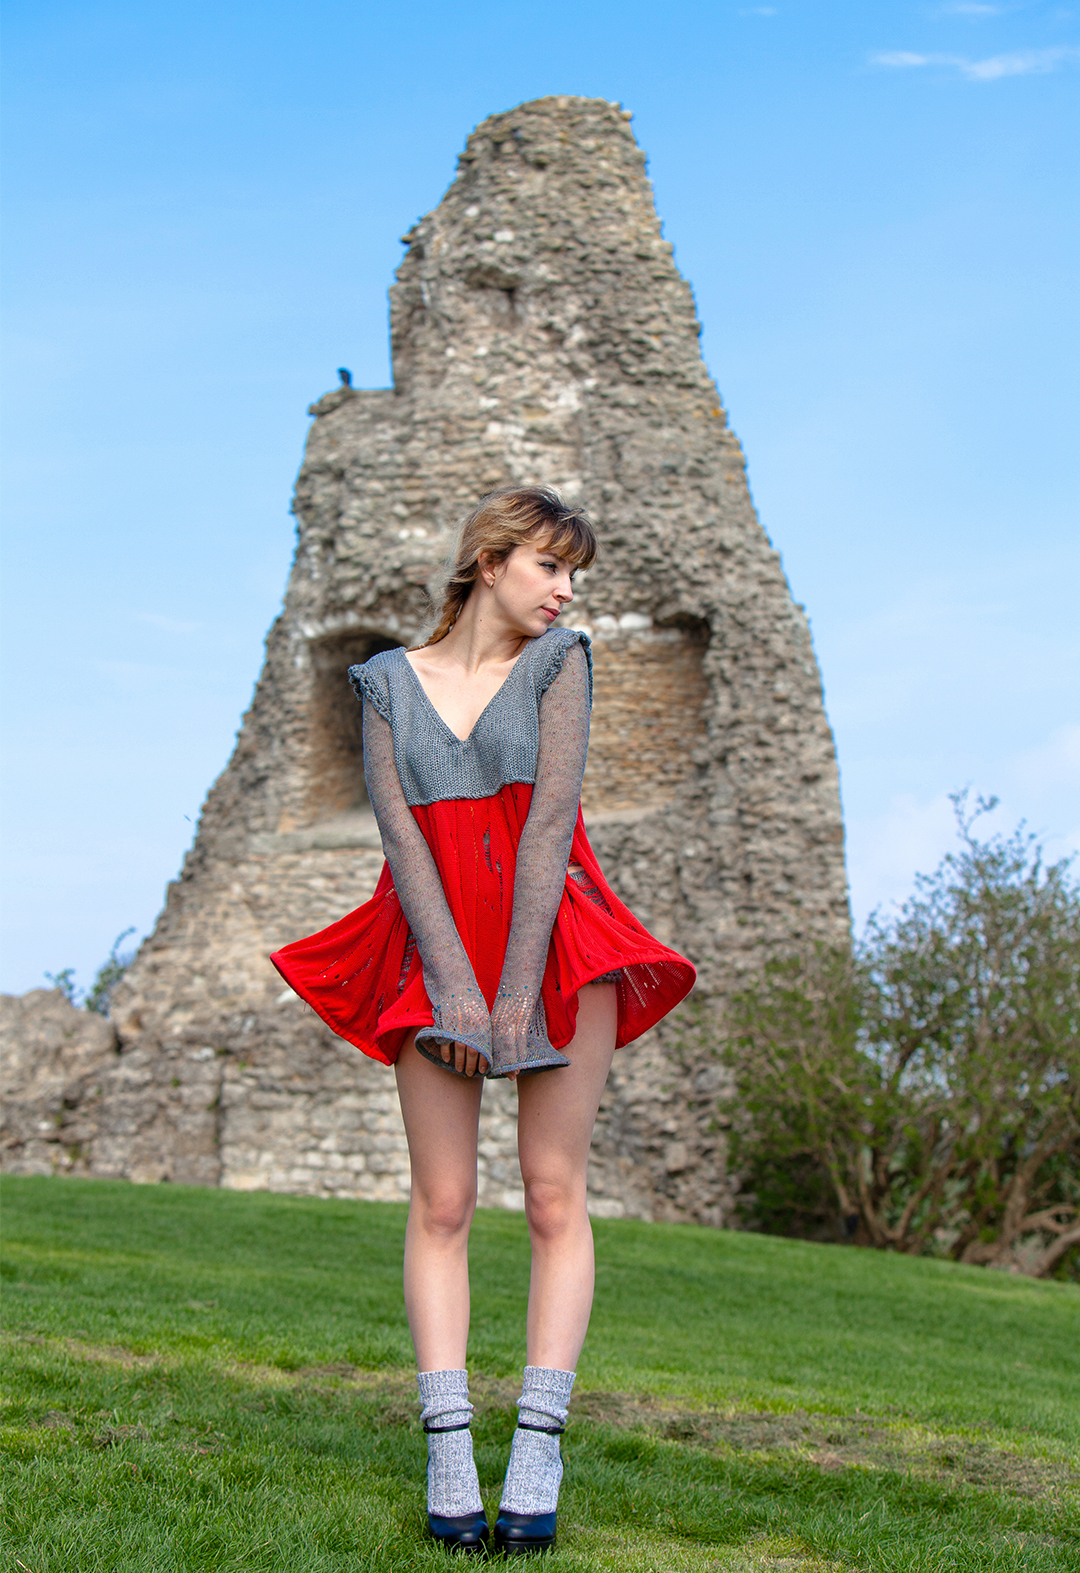  A model is posing in front of a castle in ruins with her hands in front of her. She is wearing a gray-and-red knitted fairy-tale dress, gray knitted briefs with a crochet edge, and a sheer lace top with bead accents.